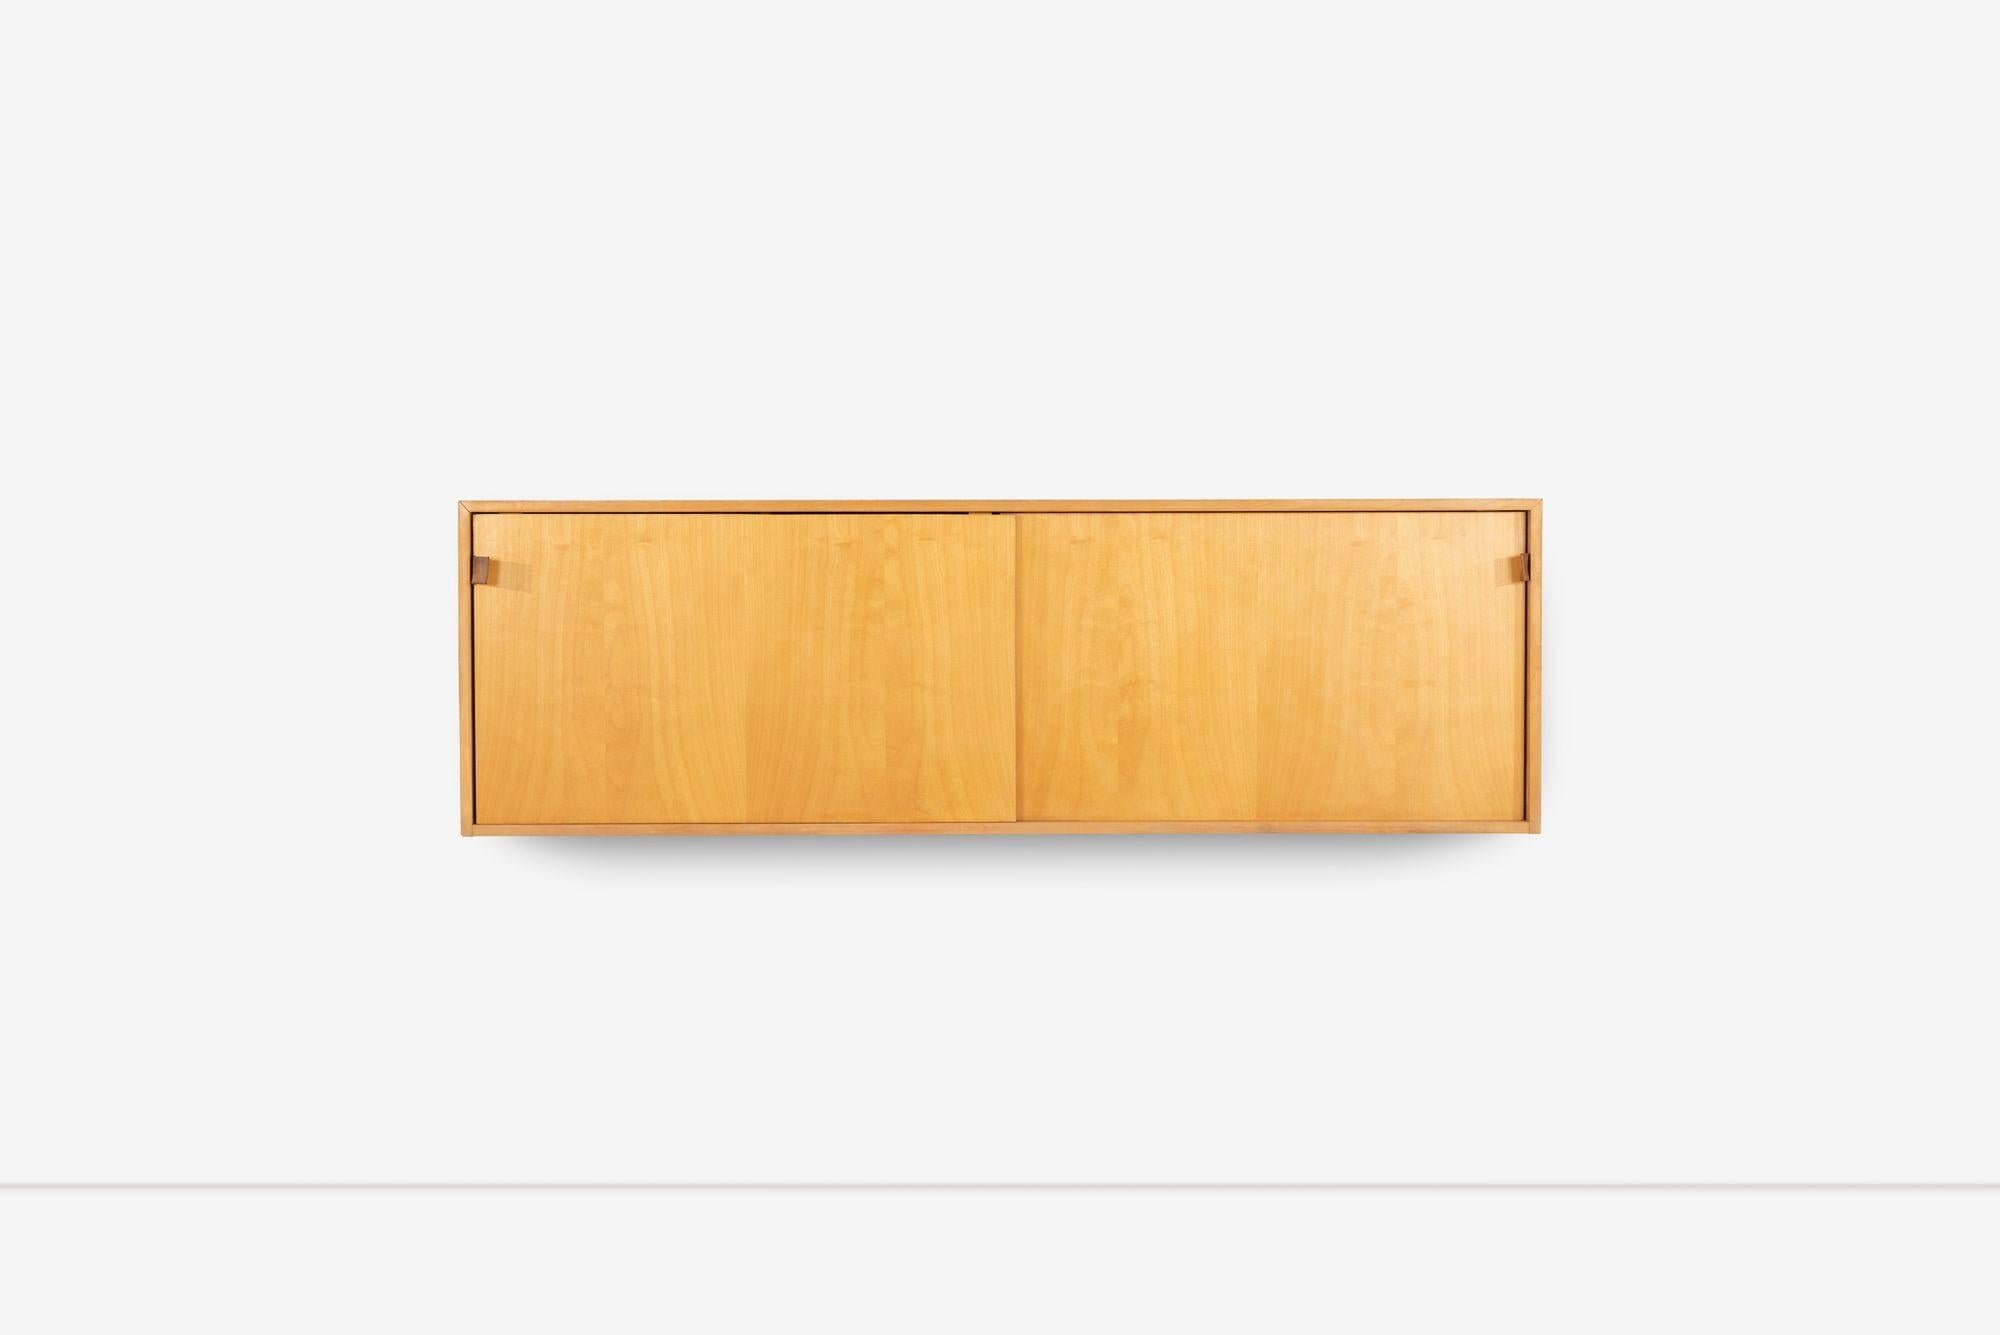 Florence Knoll Hanging Cabinet for Knoll International, Model 121
Birch case with drop front doors. Inside pull-out drawer with flatware dividers, Adjustable wood shelves, and Saddle leather pulls.